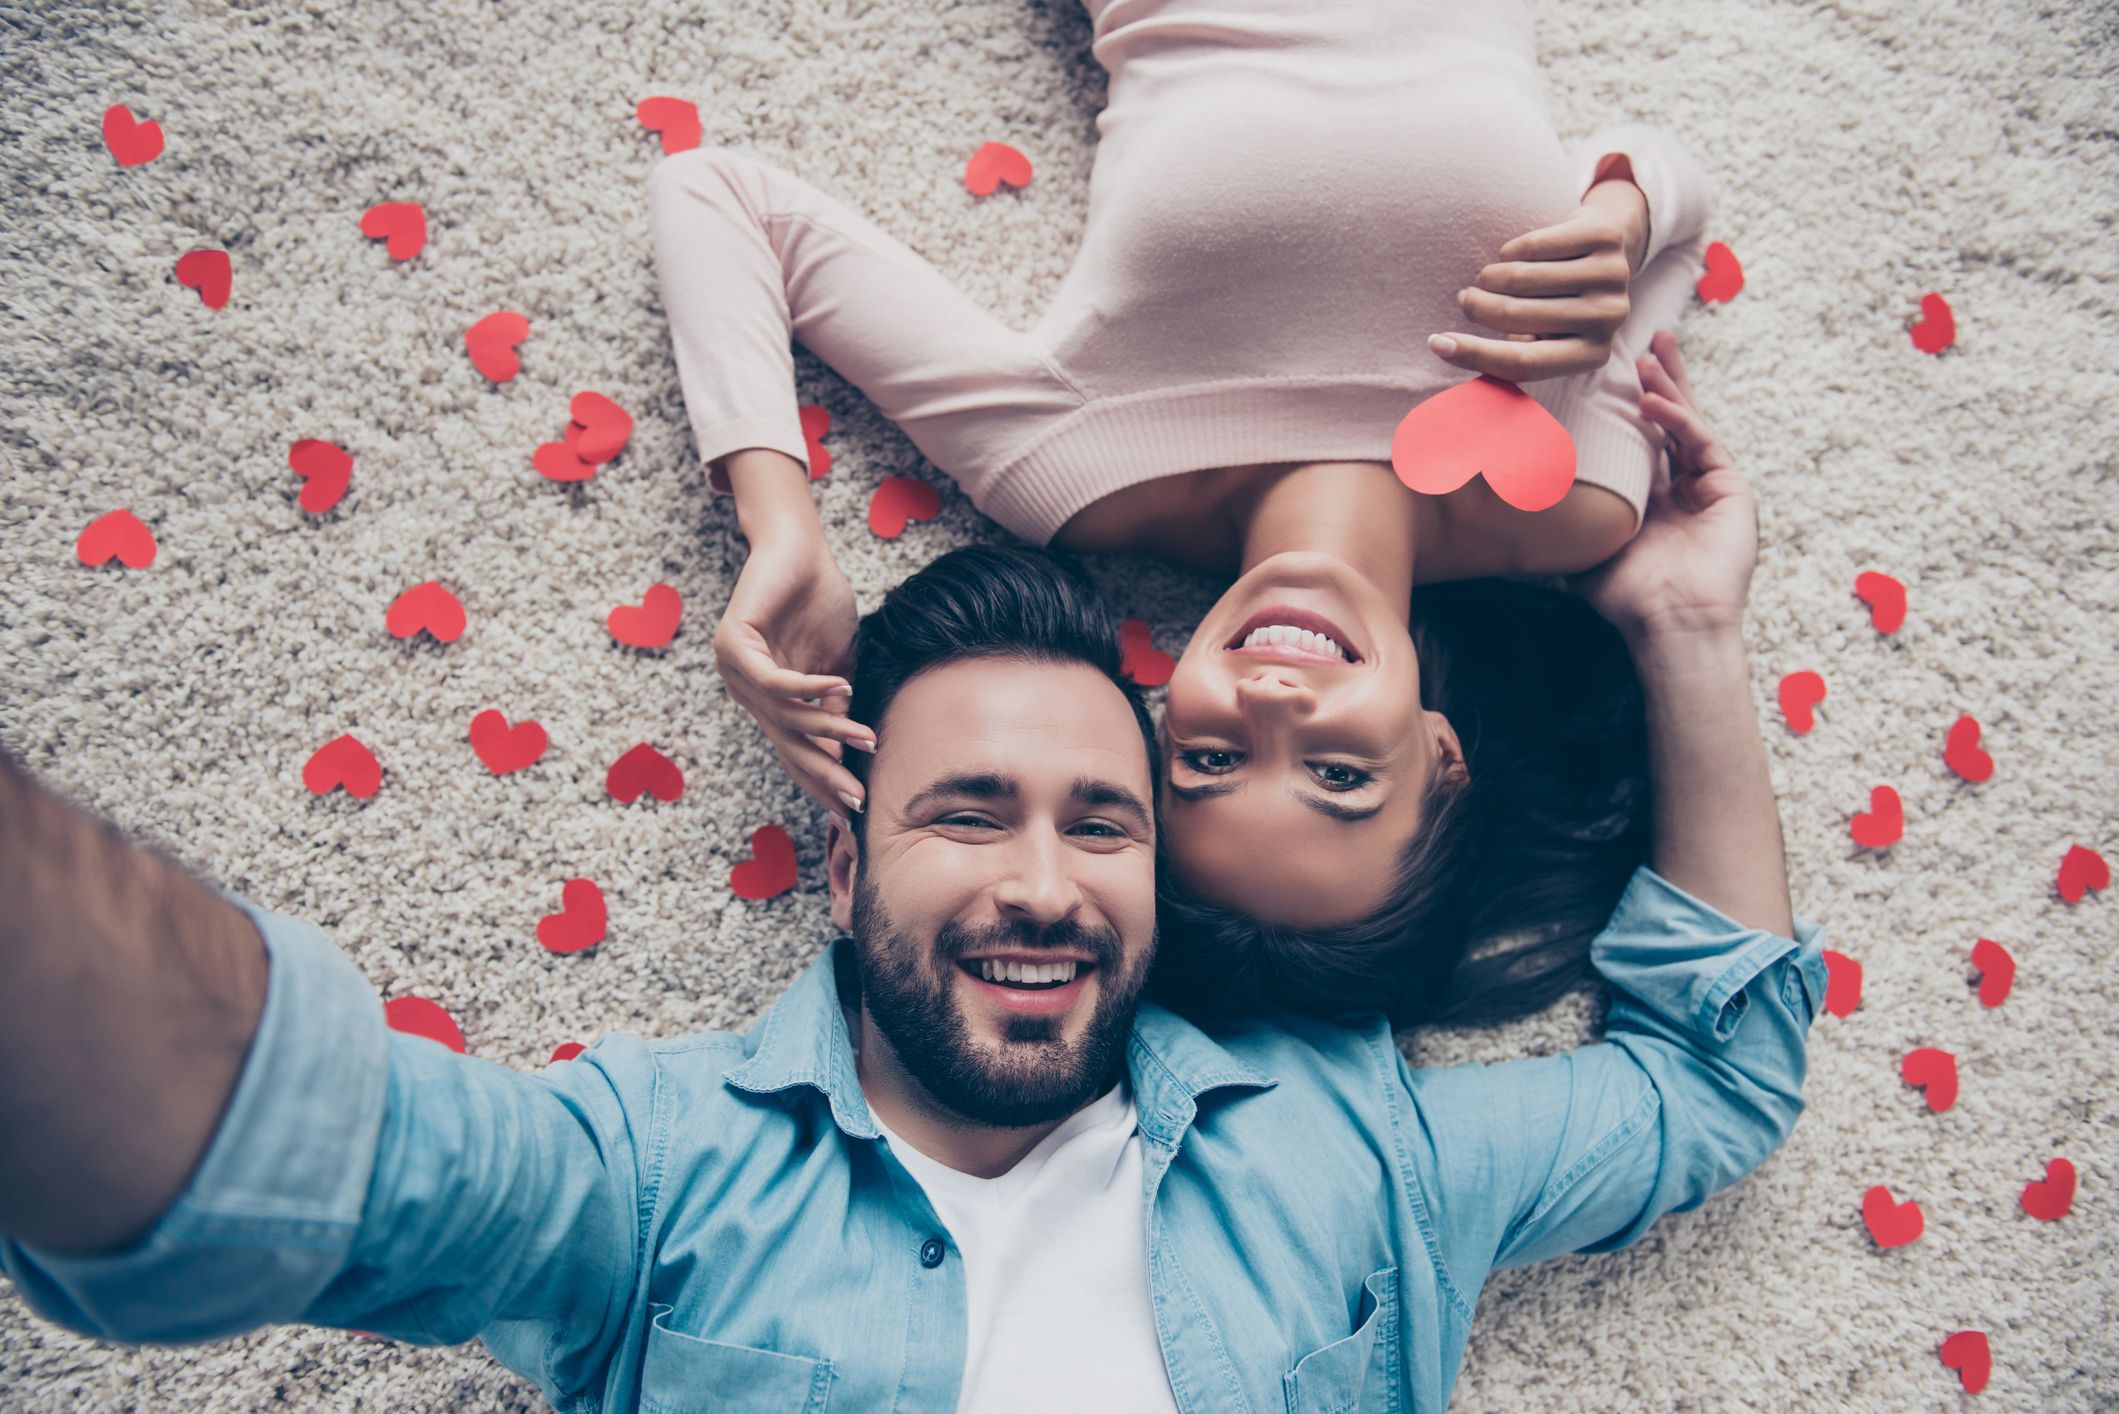 11 tips to take great couple pictures by yourself for Instagram